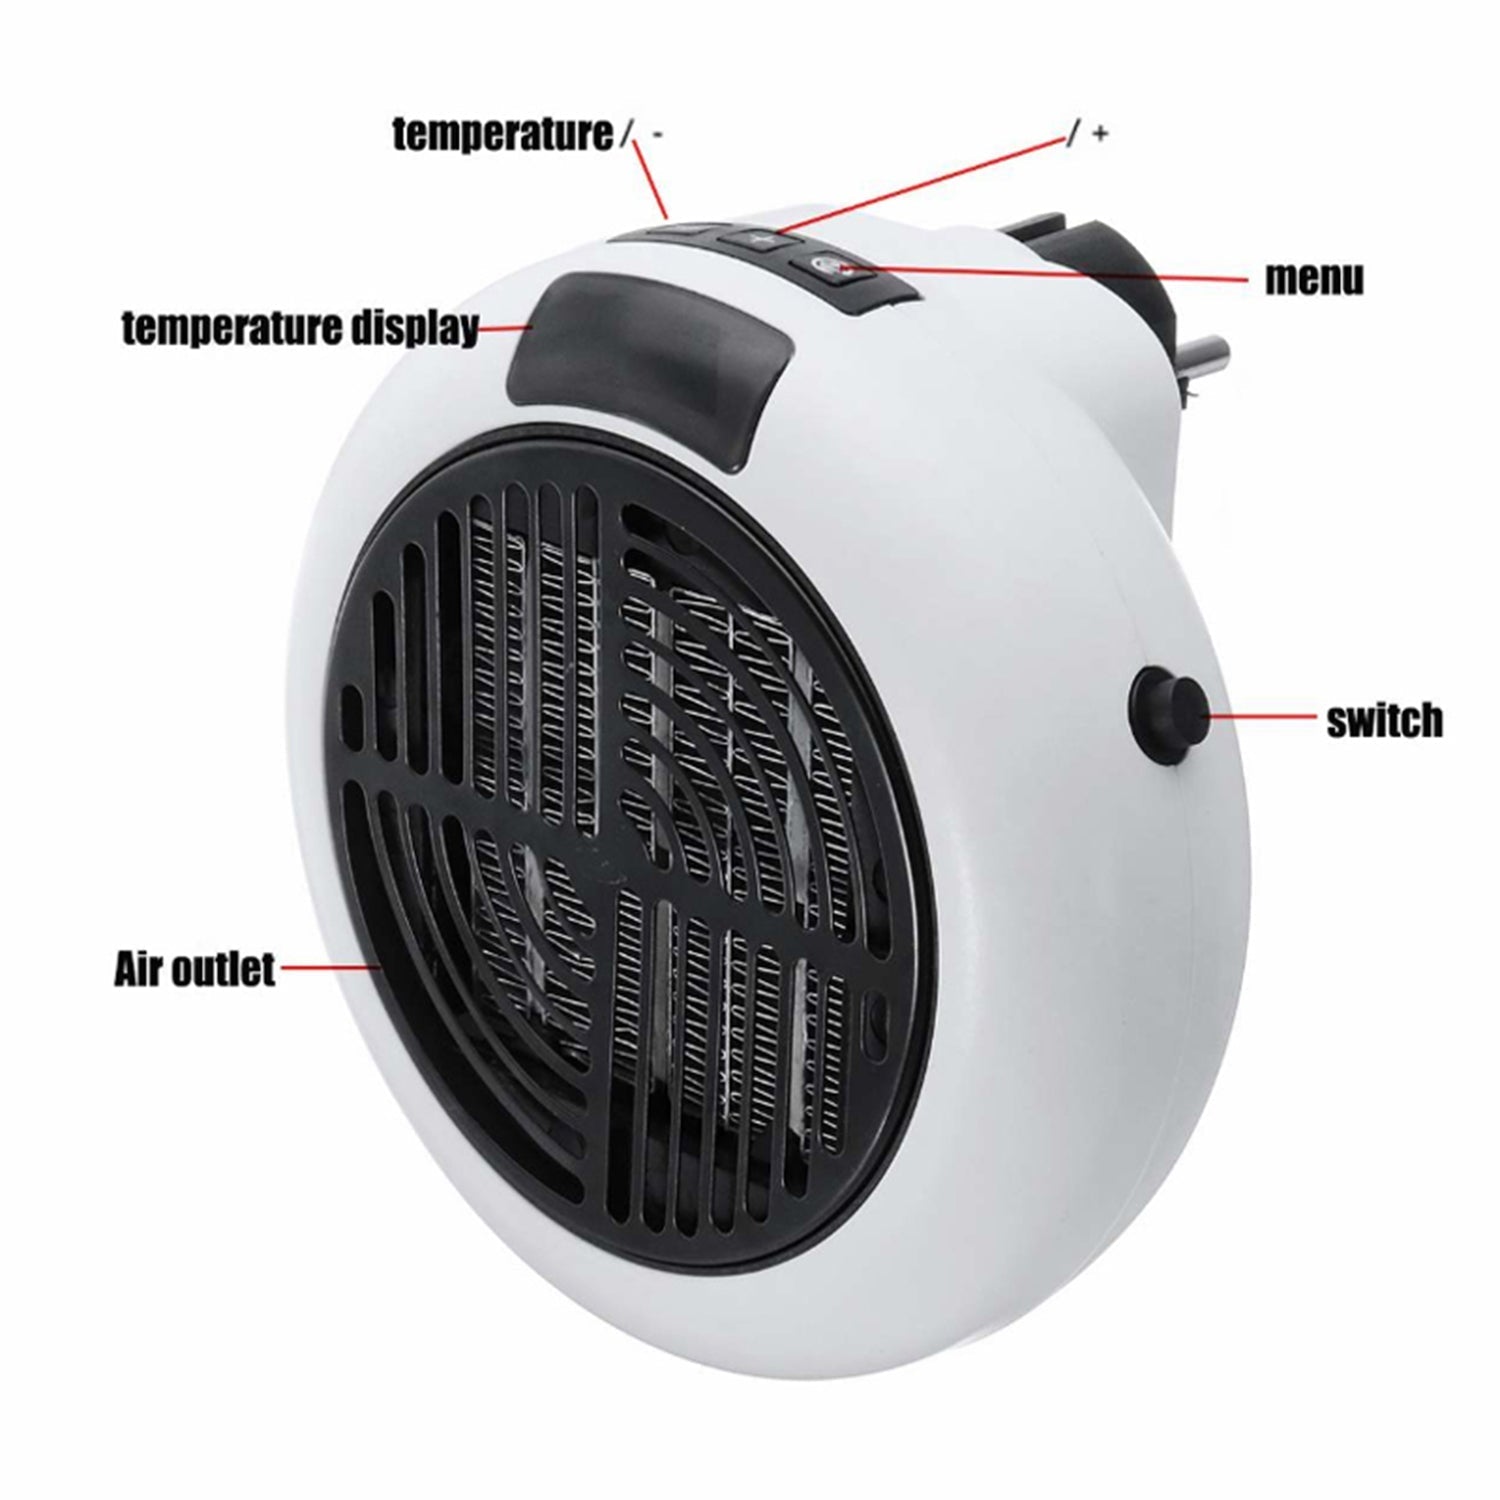 6117 Portable Heater 900W used in rooms, offices and different-different departments